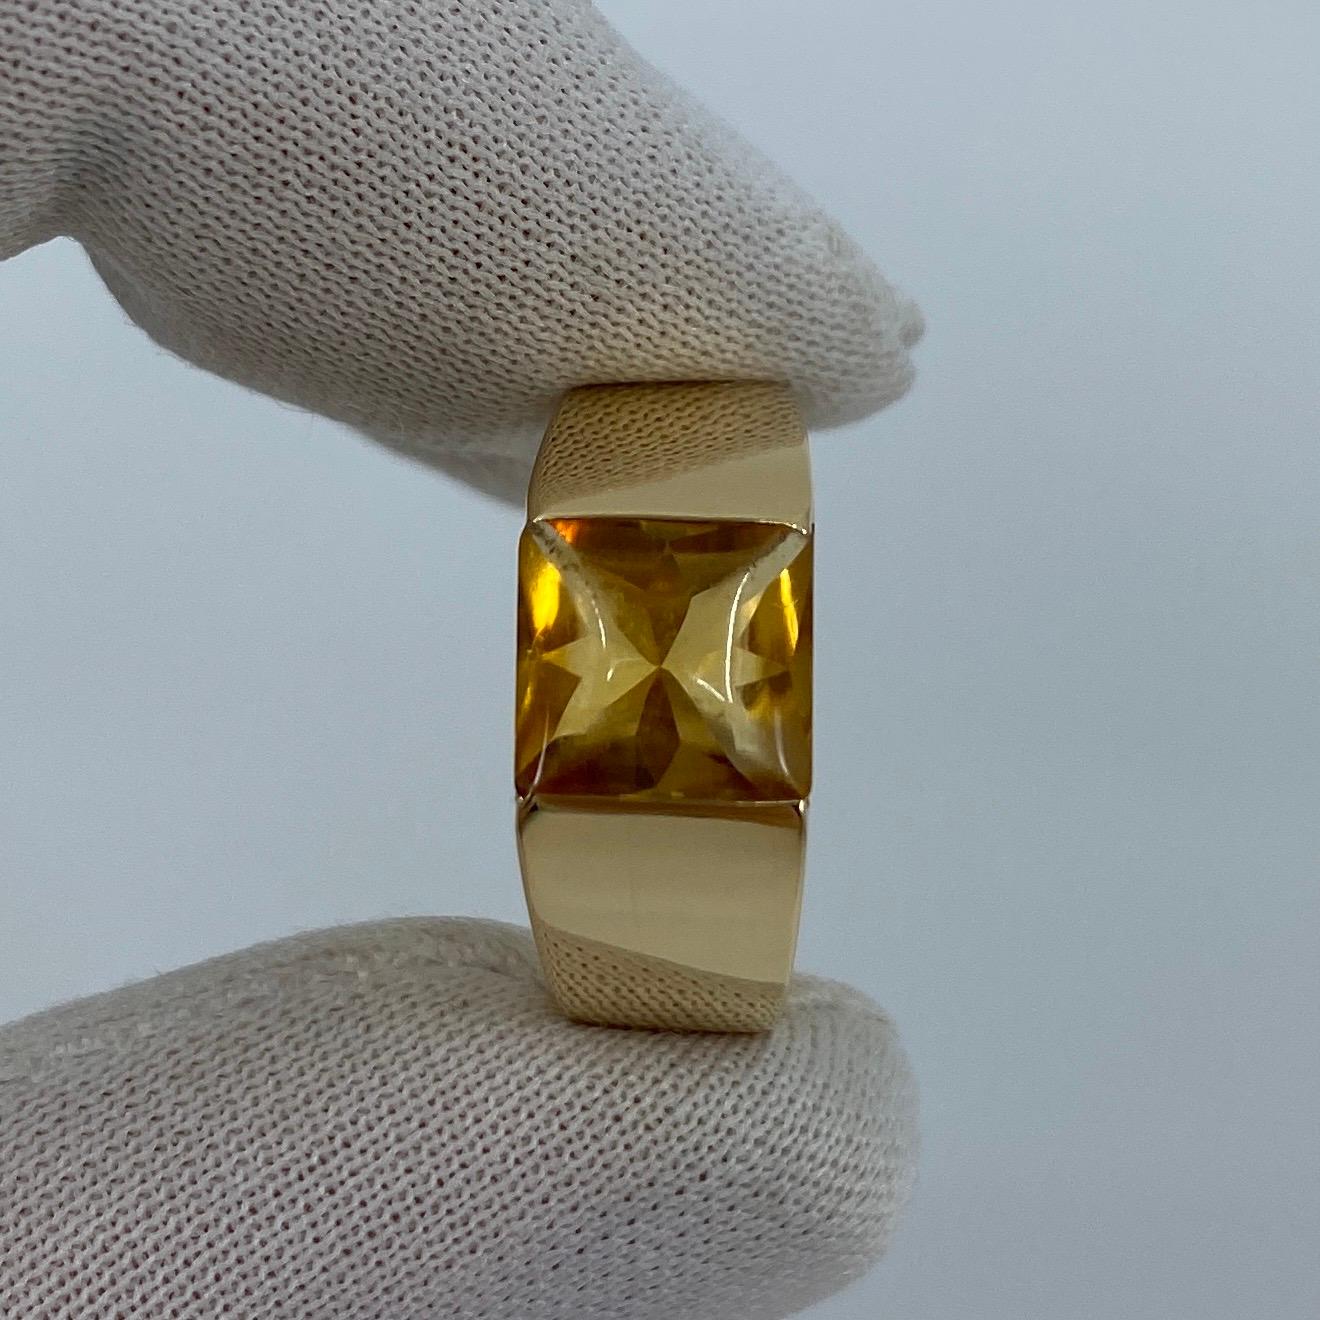 Cartier Vivid Yellow Citrine 18k Yellow Gold Tank Ring.

Stunning yellow gold ring with an 8mm tension set vivid yellow citrine. Fine jewellery houses like Cartier only use the finest of gemstones and this citrine is no exception. A top grade